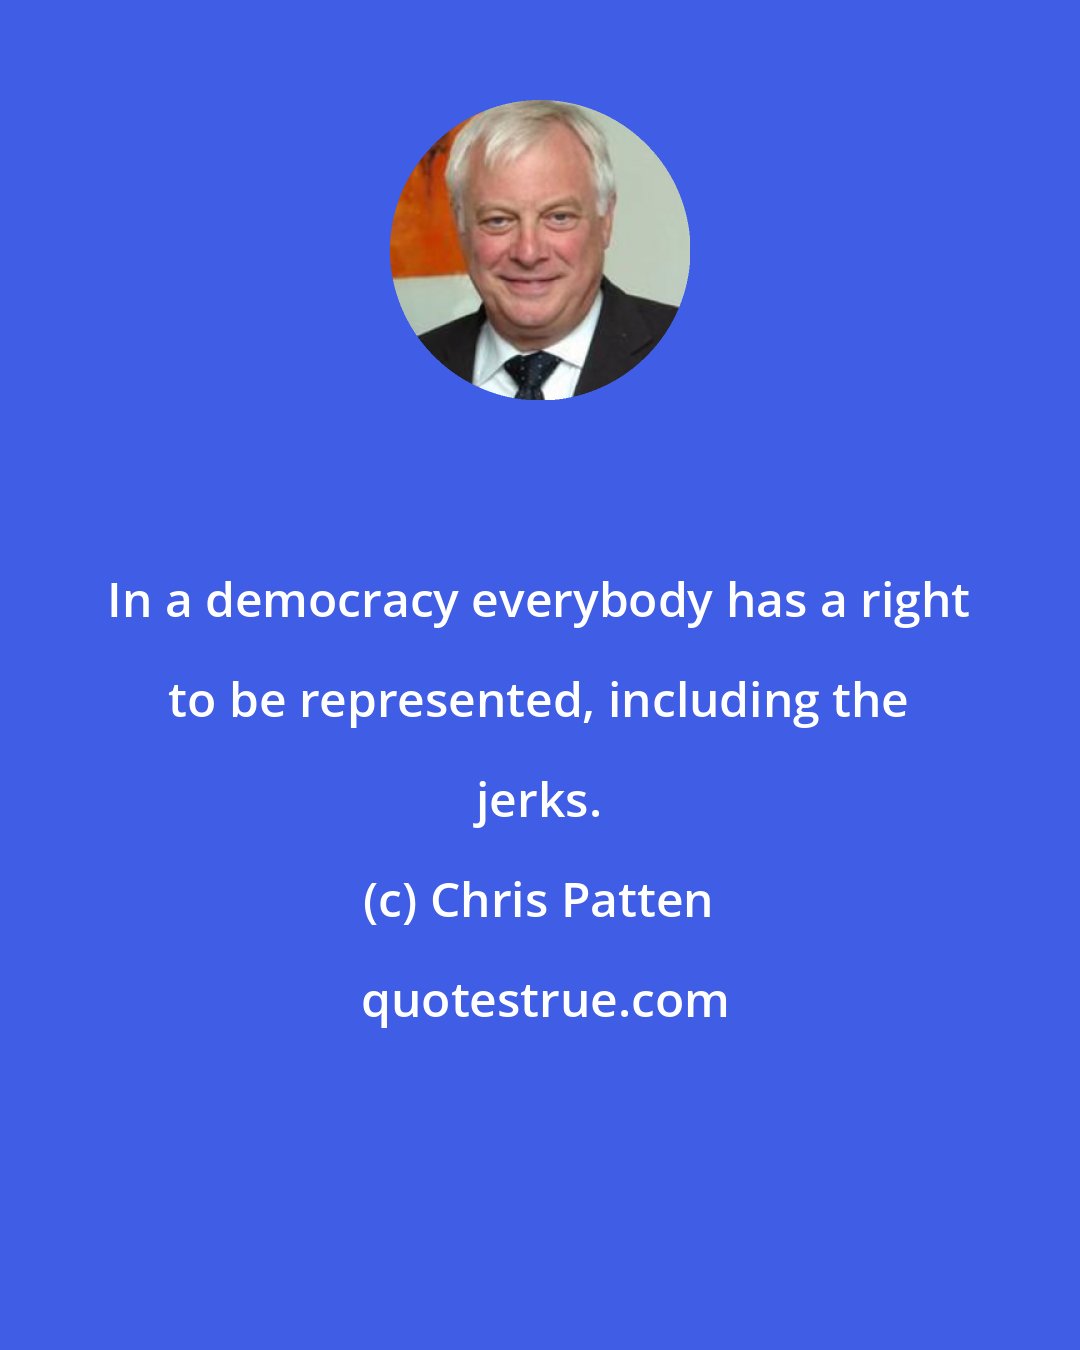 Chris Patten: In a democracy everybody has a right to be represented, including the jerks.